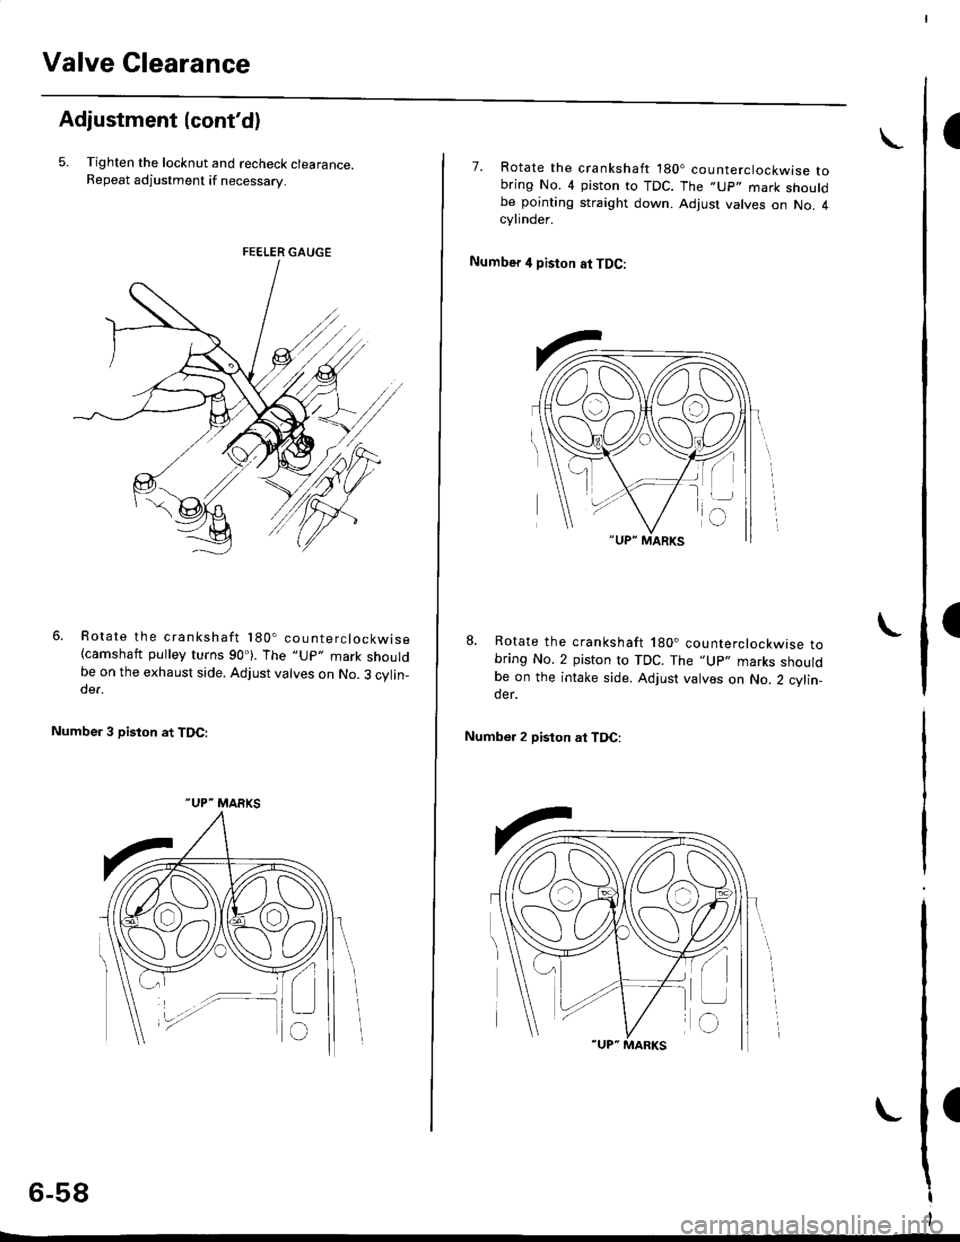 HONDA CIVIC 1998 6.G Service Manual Valve Clearance
I
I
I
Adjustment {contd)
5. Tighten the locknut and recheck clearance.Repeat adjustment if necessary.
Rotate the crankshaft 180. counterclockwise(camshaft pulley turns 90). The "Up" 